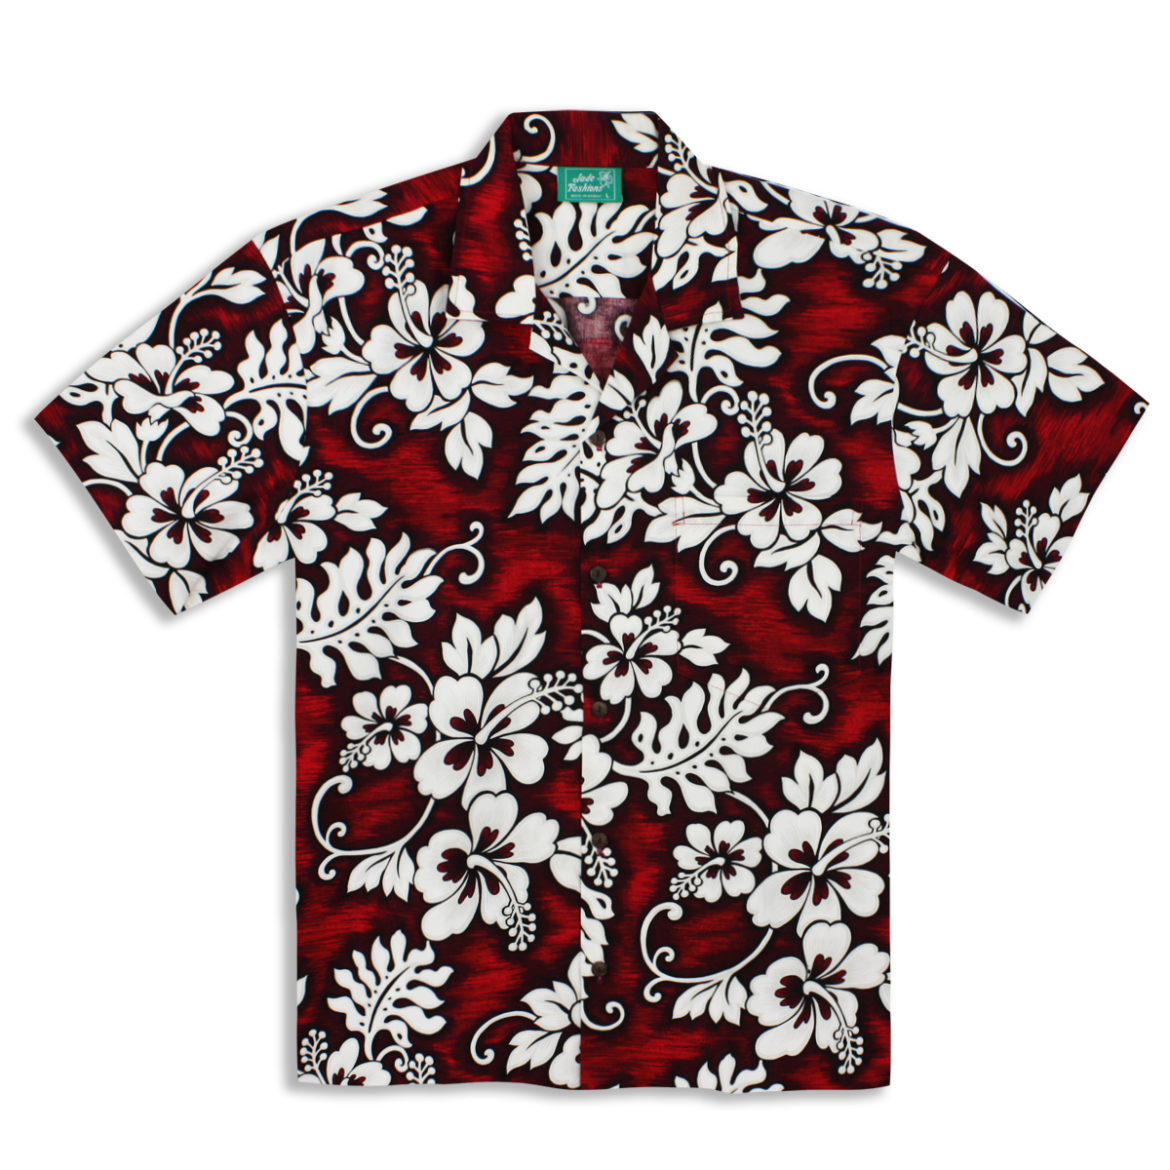 Men's Shirt - hibiscus Bliss - red -front image